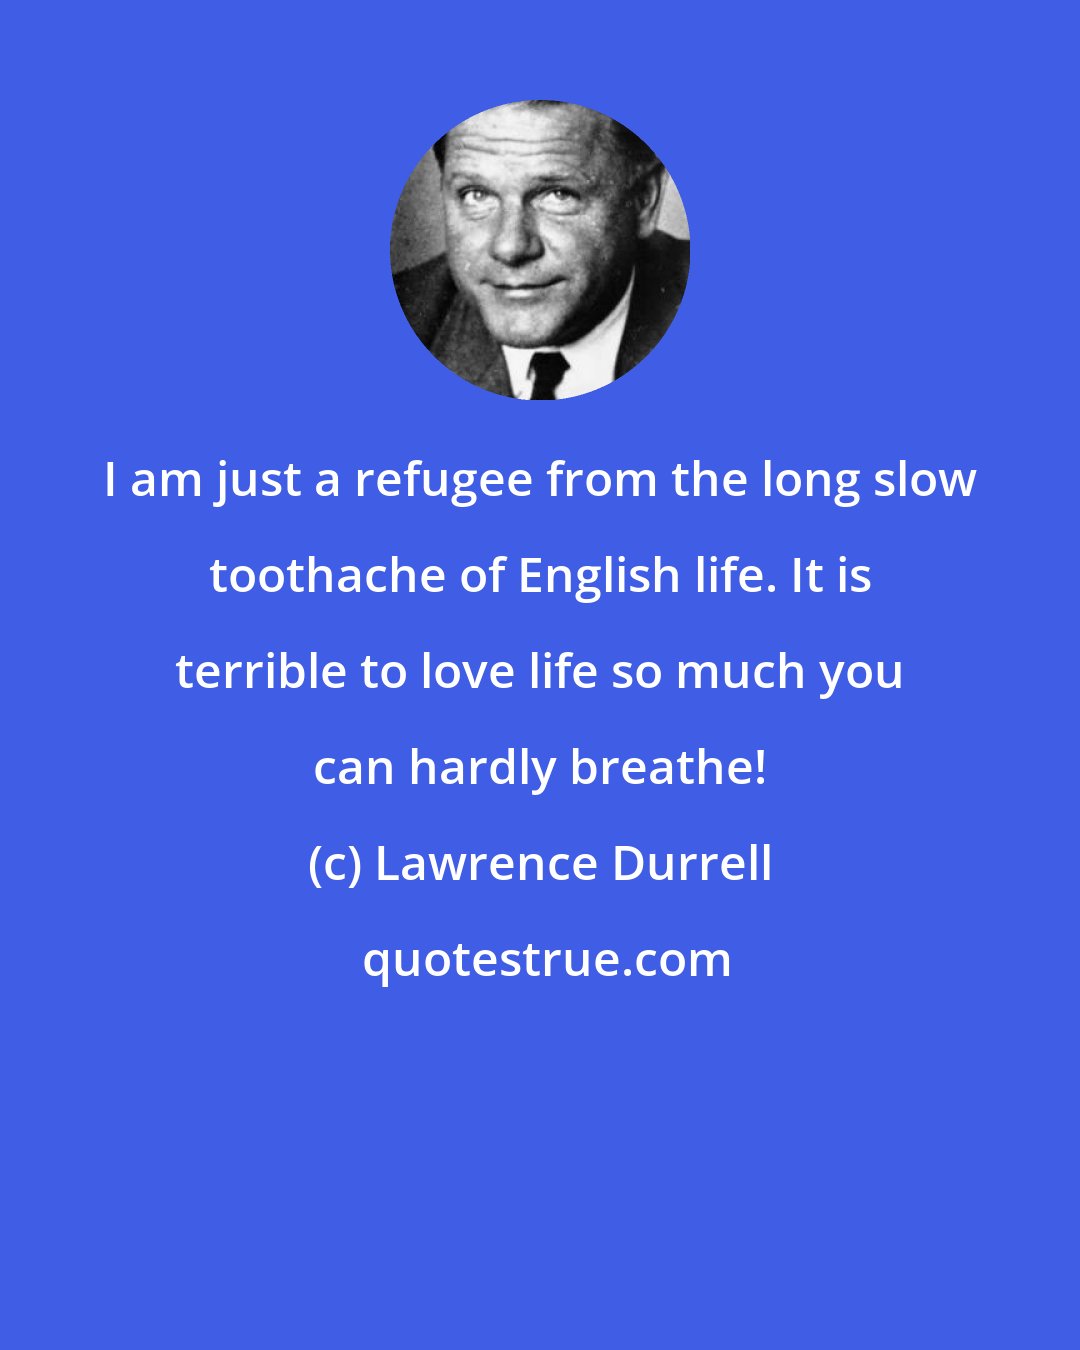 Lawrence Durrell: I am just a refugee from the long slow toothache of English life. It is terrible to love life so much you can hardly breathe!